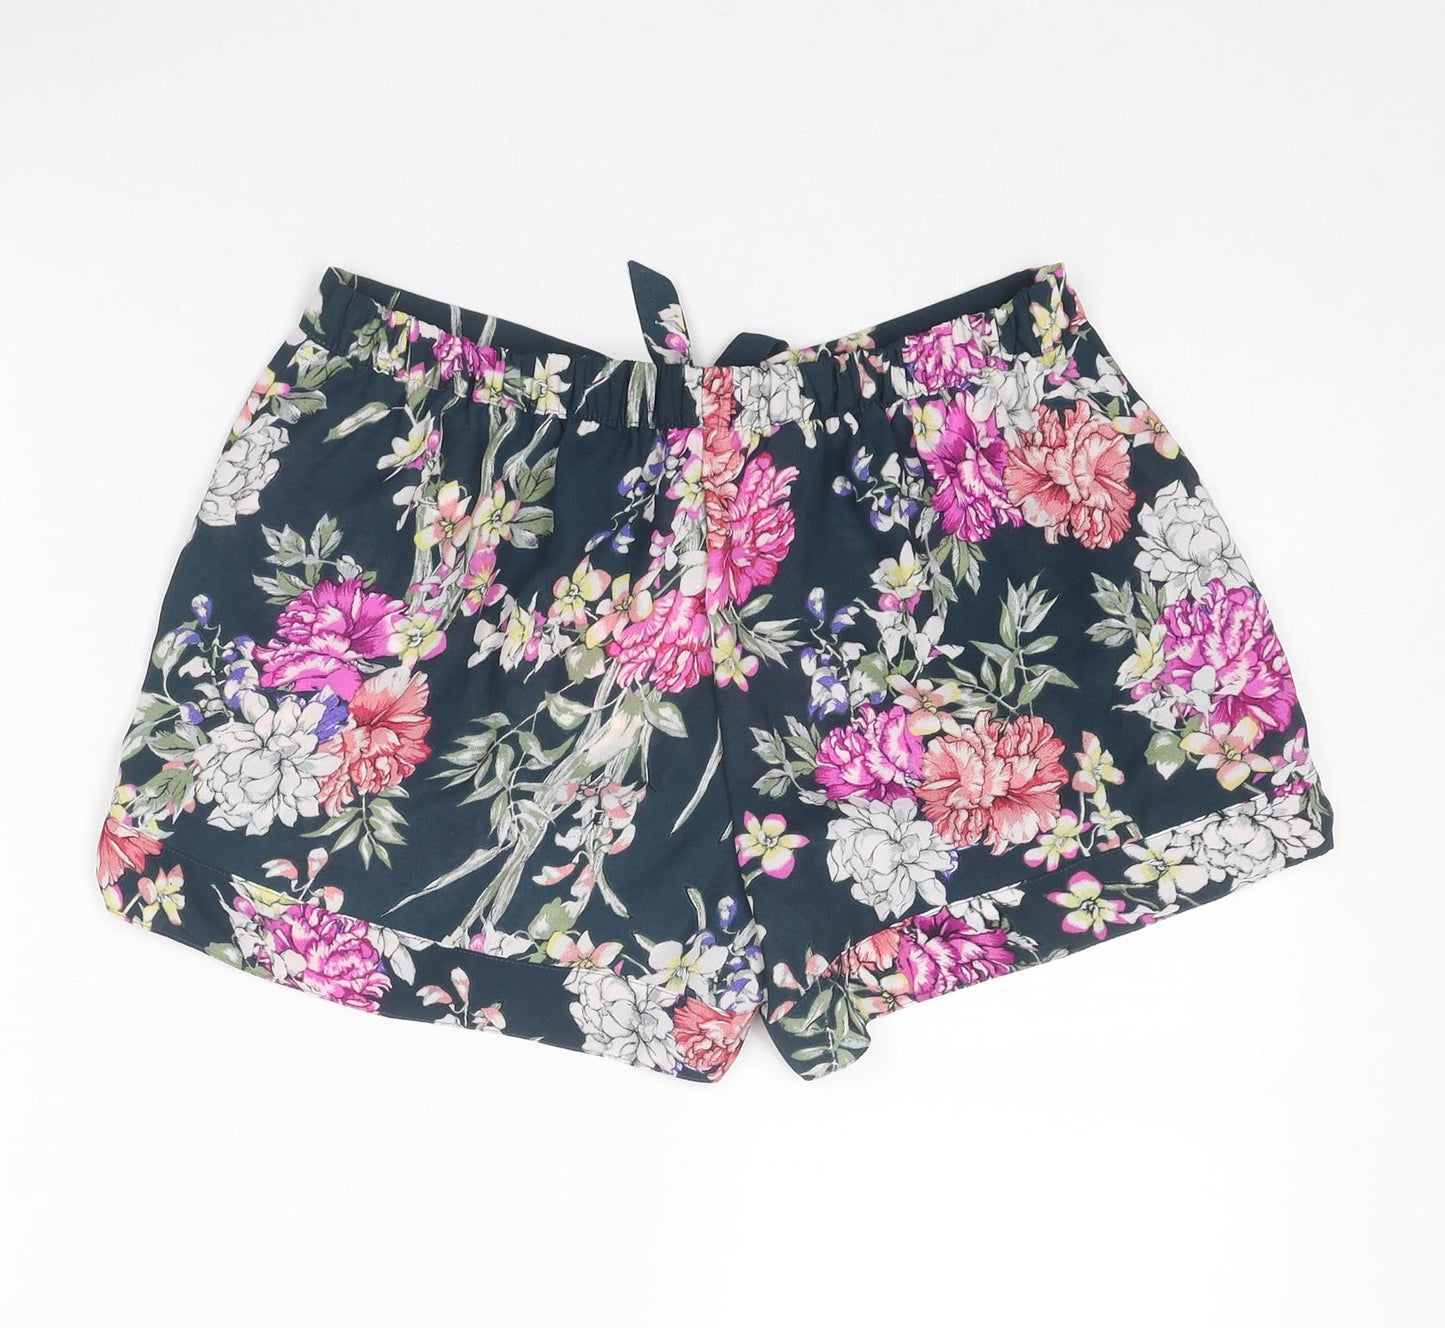 Autograph Womens Multicoloured Floral Polyester Hot Pants Shorts Size 8 Regular Drawstring